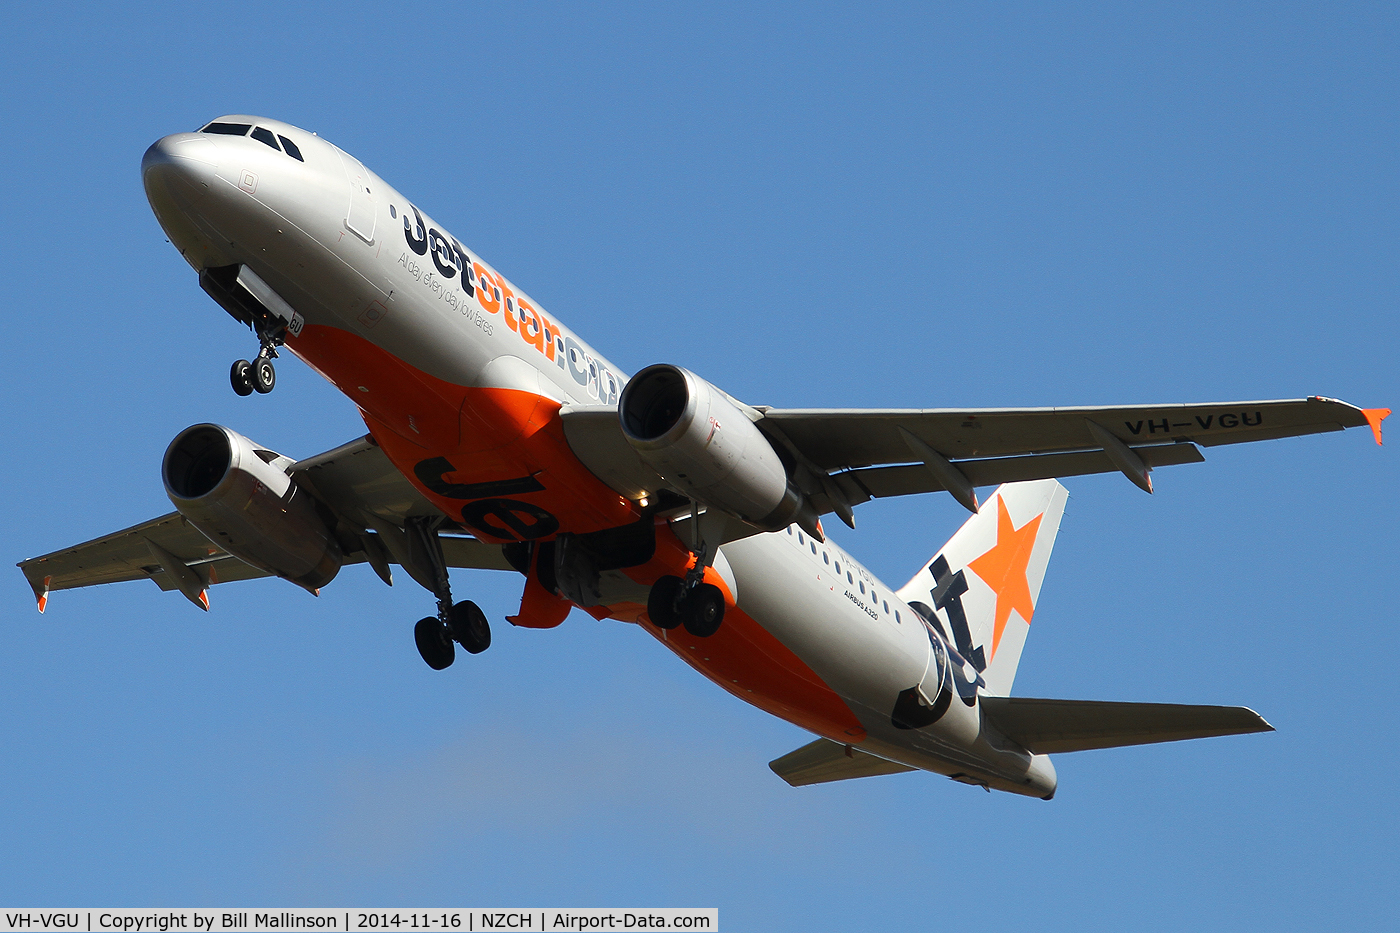 VH-VGU, 2010 Airbus A320-214 C/N 4245, up and away from 02